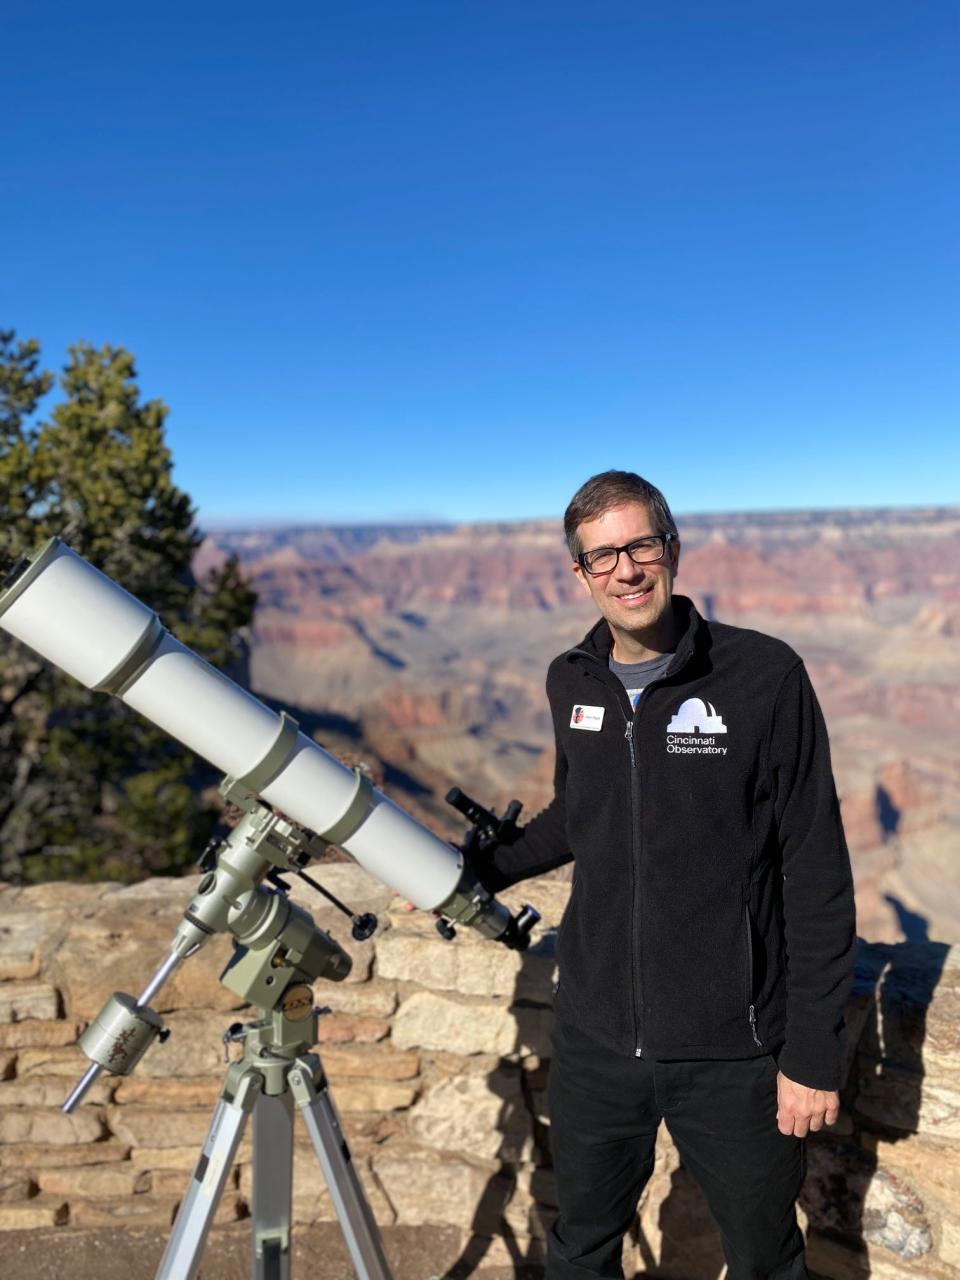 Dean Regas, of the Cincinnati Observatory, served as Astronomer in Residence at the Grand Canyon from Nov. 16 to Dec. 8, 2021.